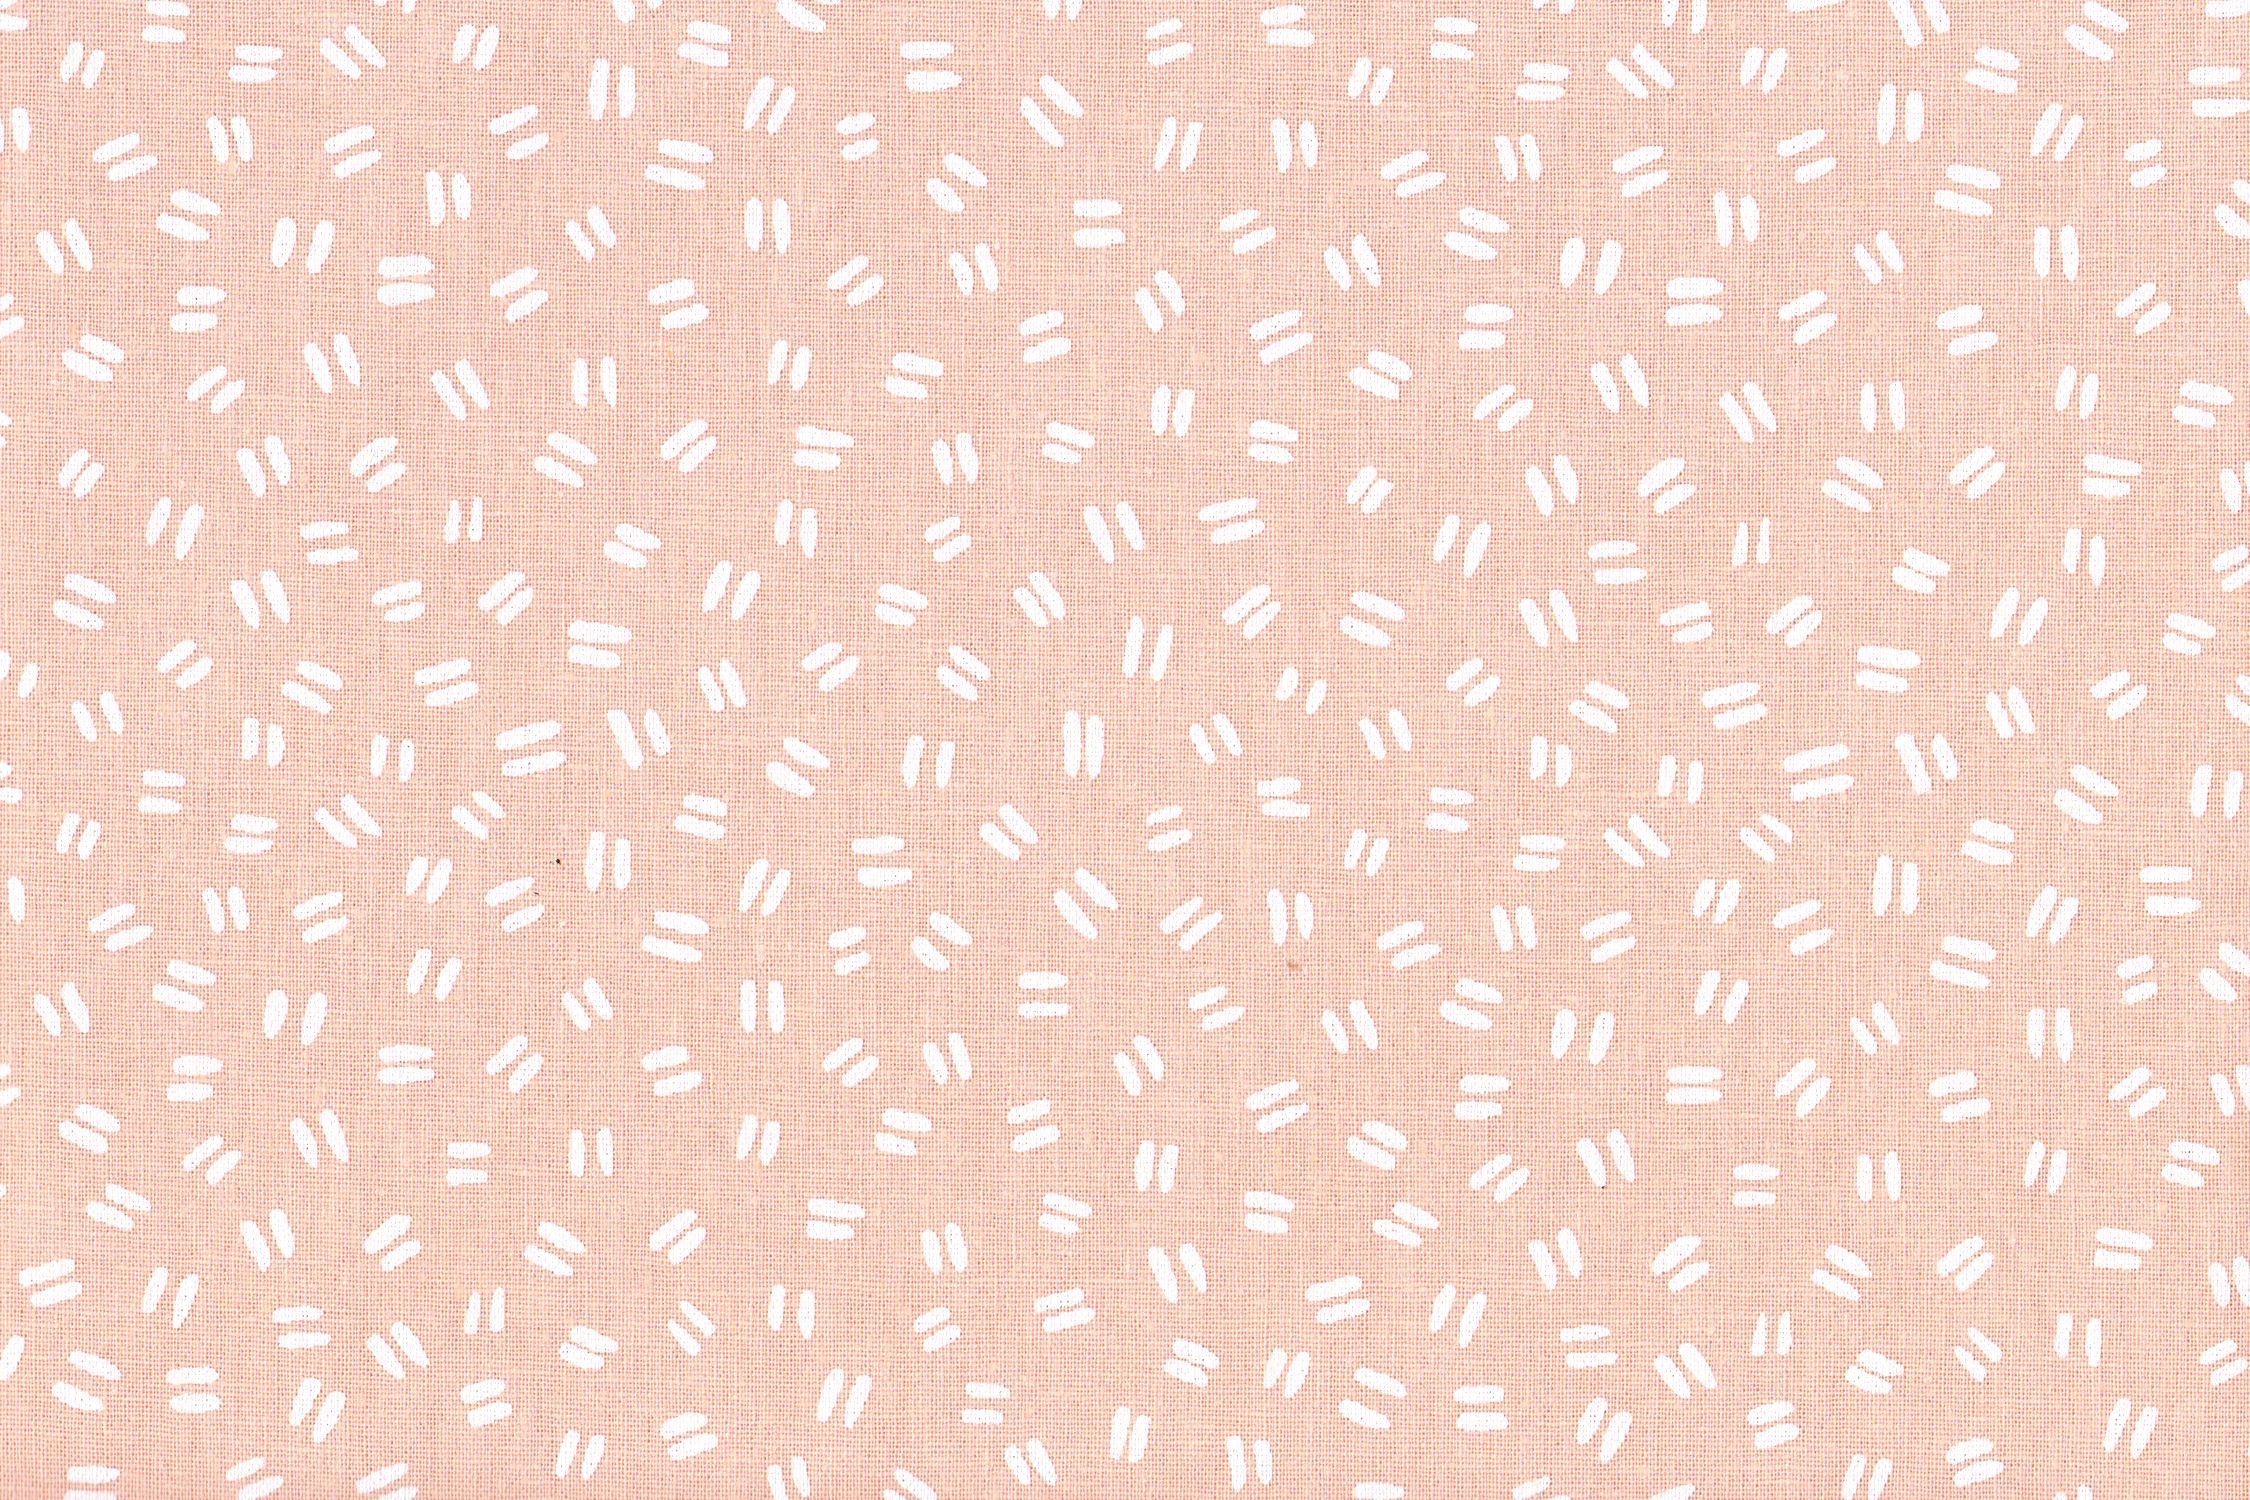 A peach colored fabric with white painted dashes - Peach